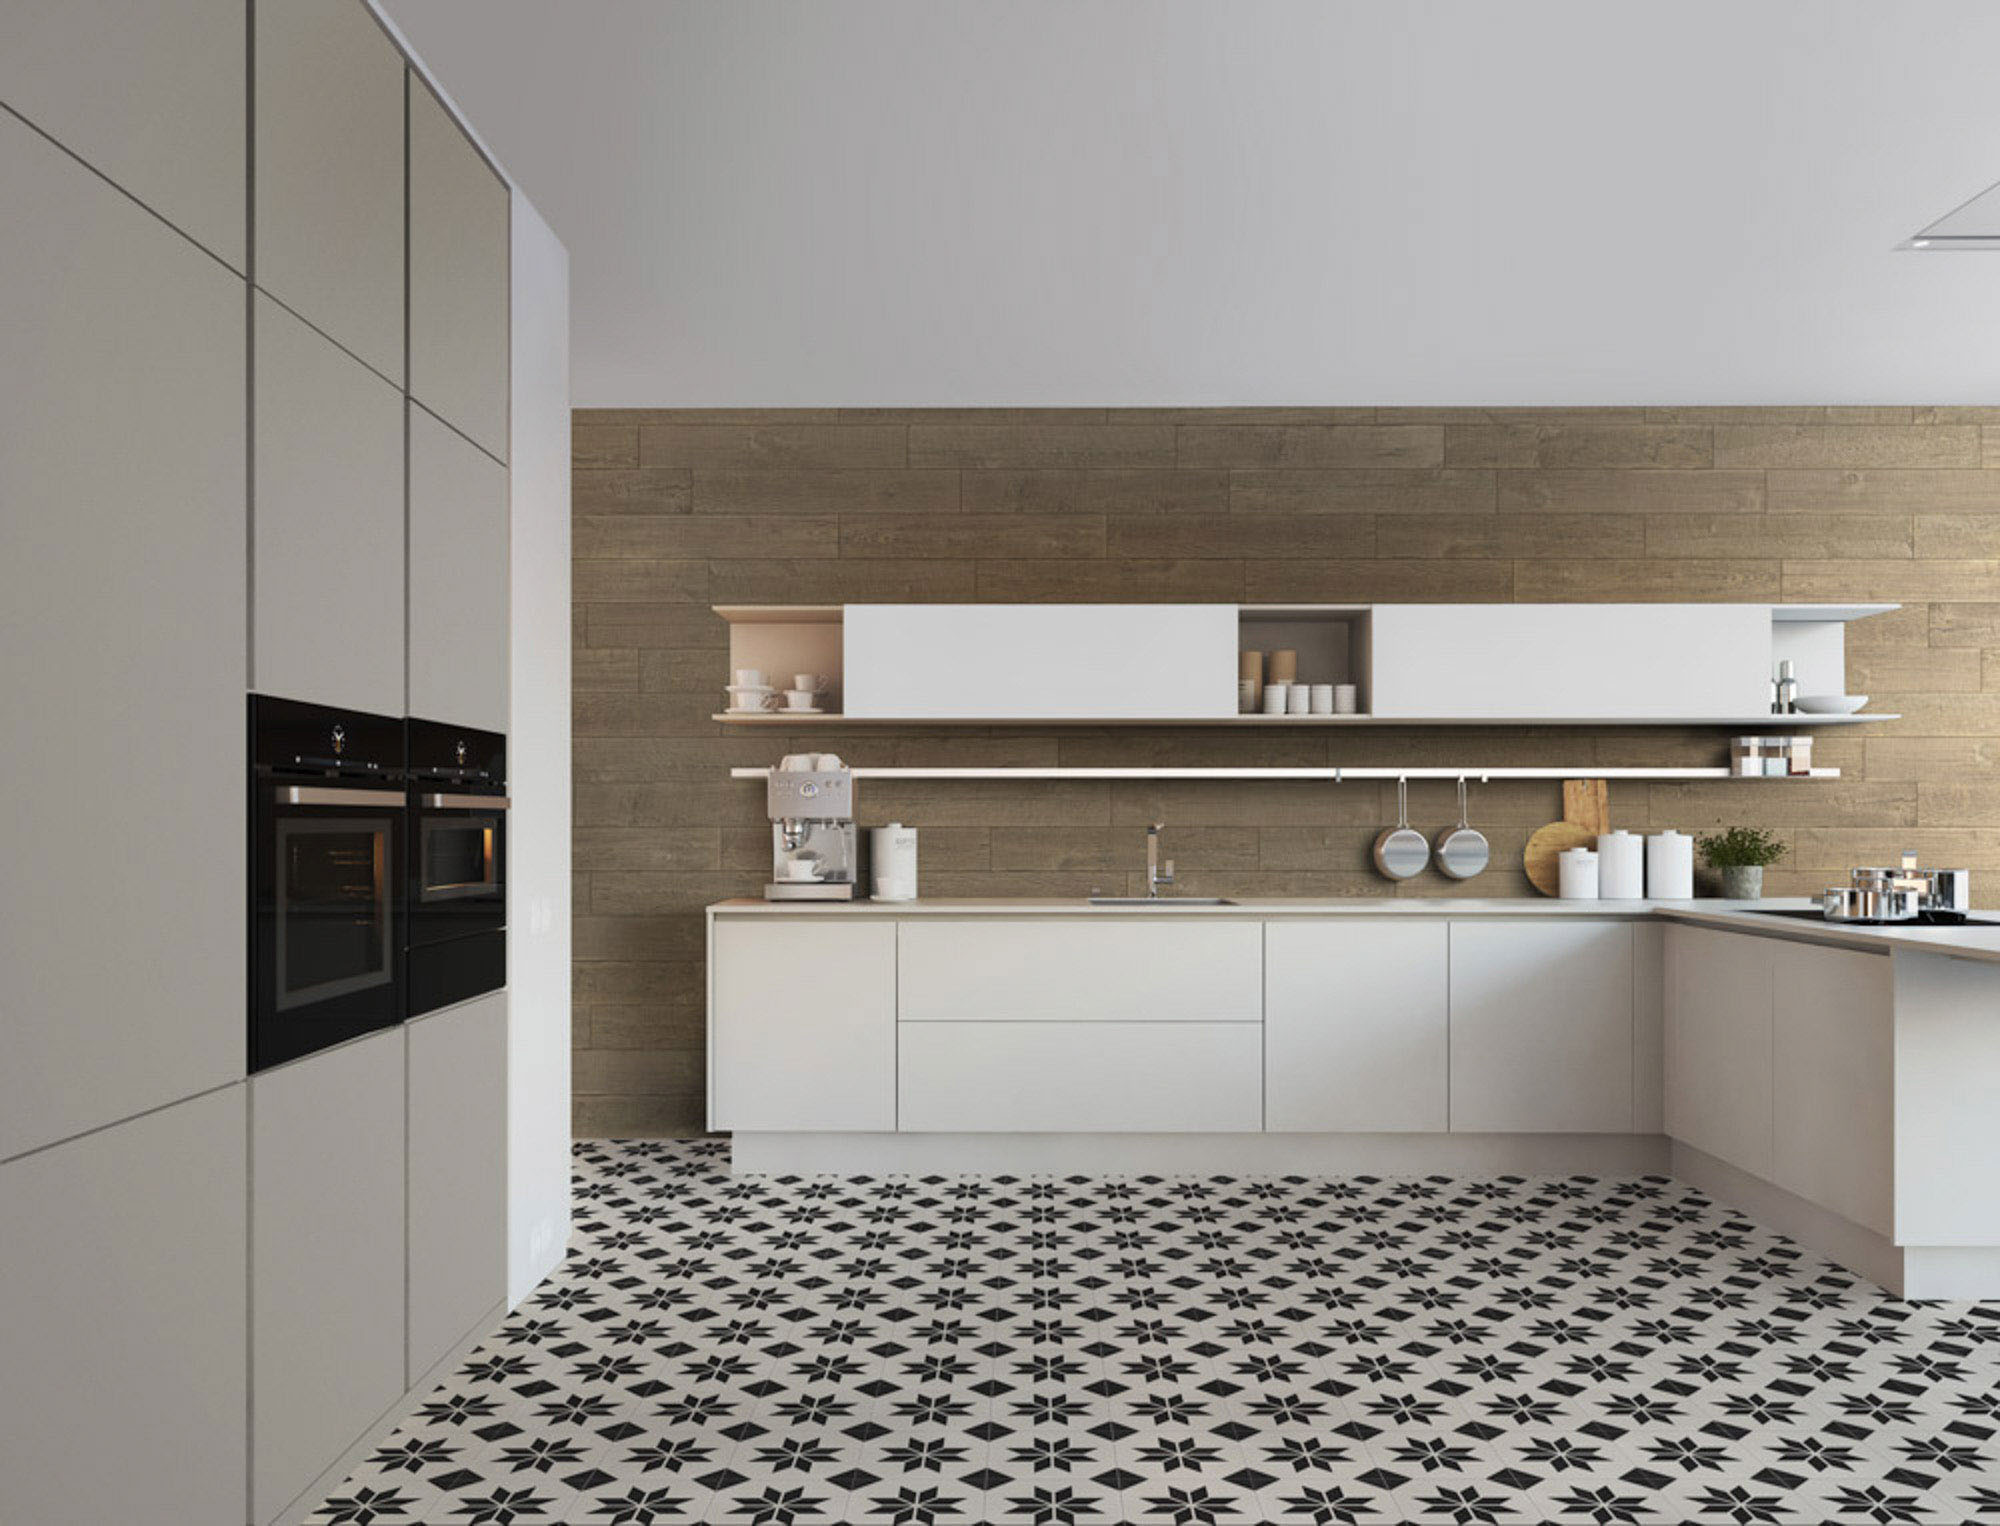 Aparici tiles in the kitchen with black and white hydraulic flooring